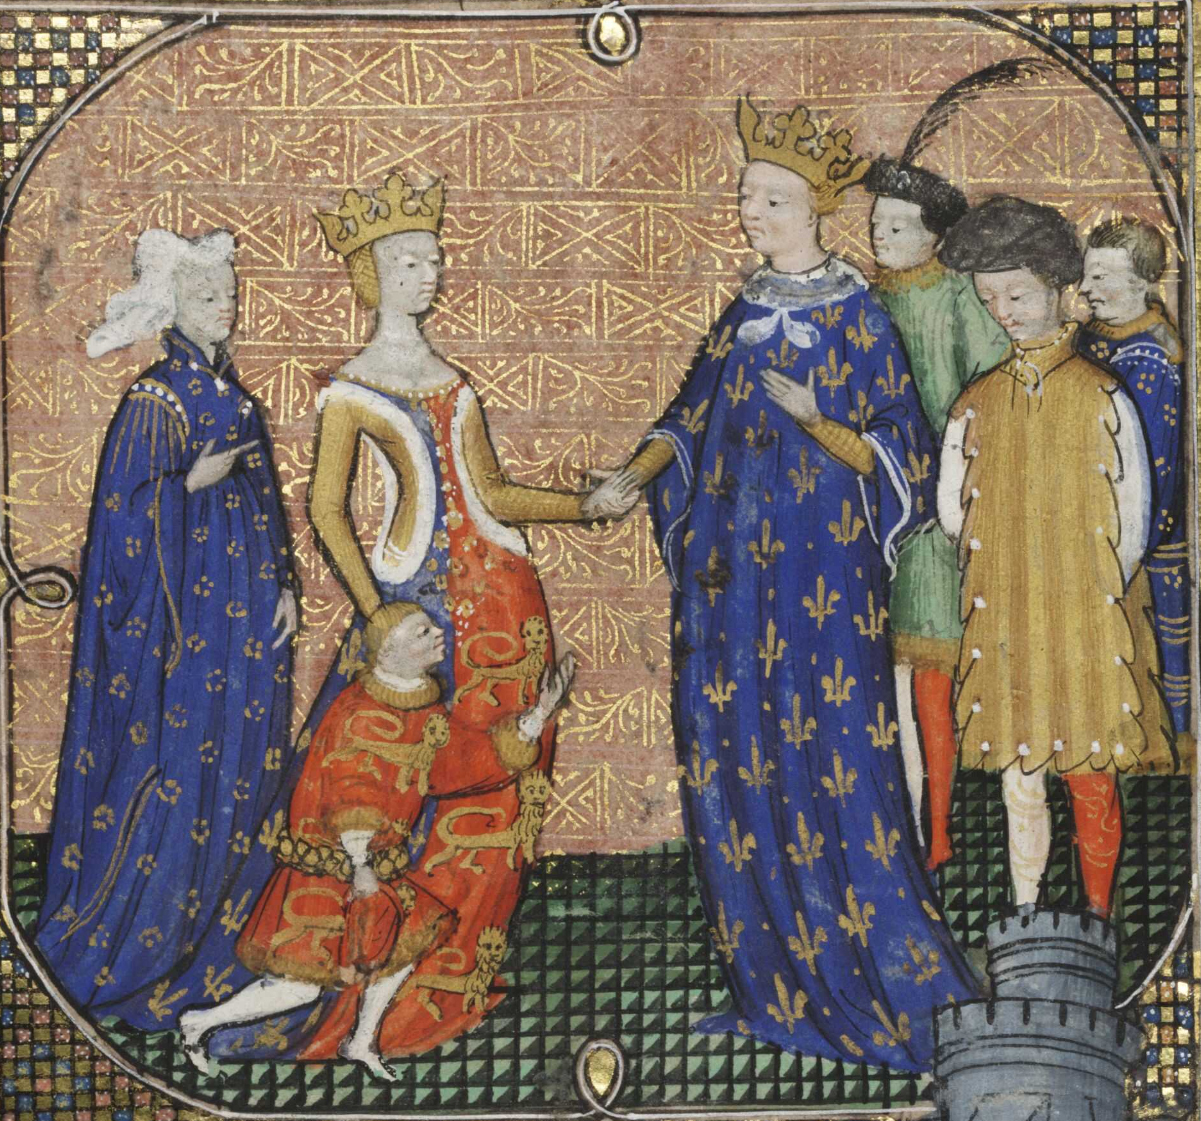 A near-contemporary miniature showing the future Edward III giving homage to Charles IV under the guidance of Edward's mother, and Charles's sister, Isabella, in 1325.[19]